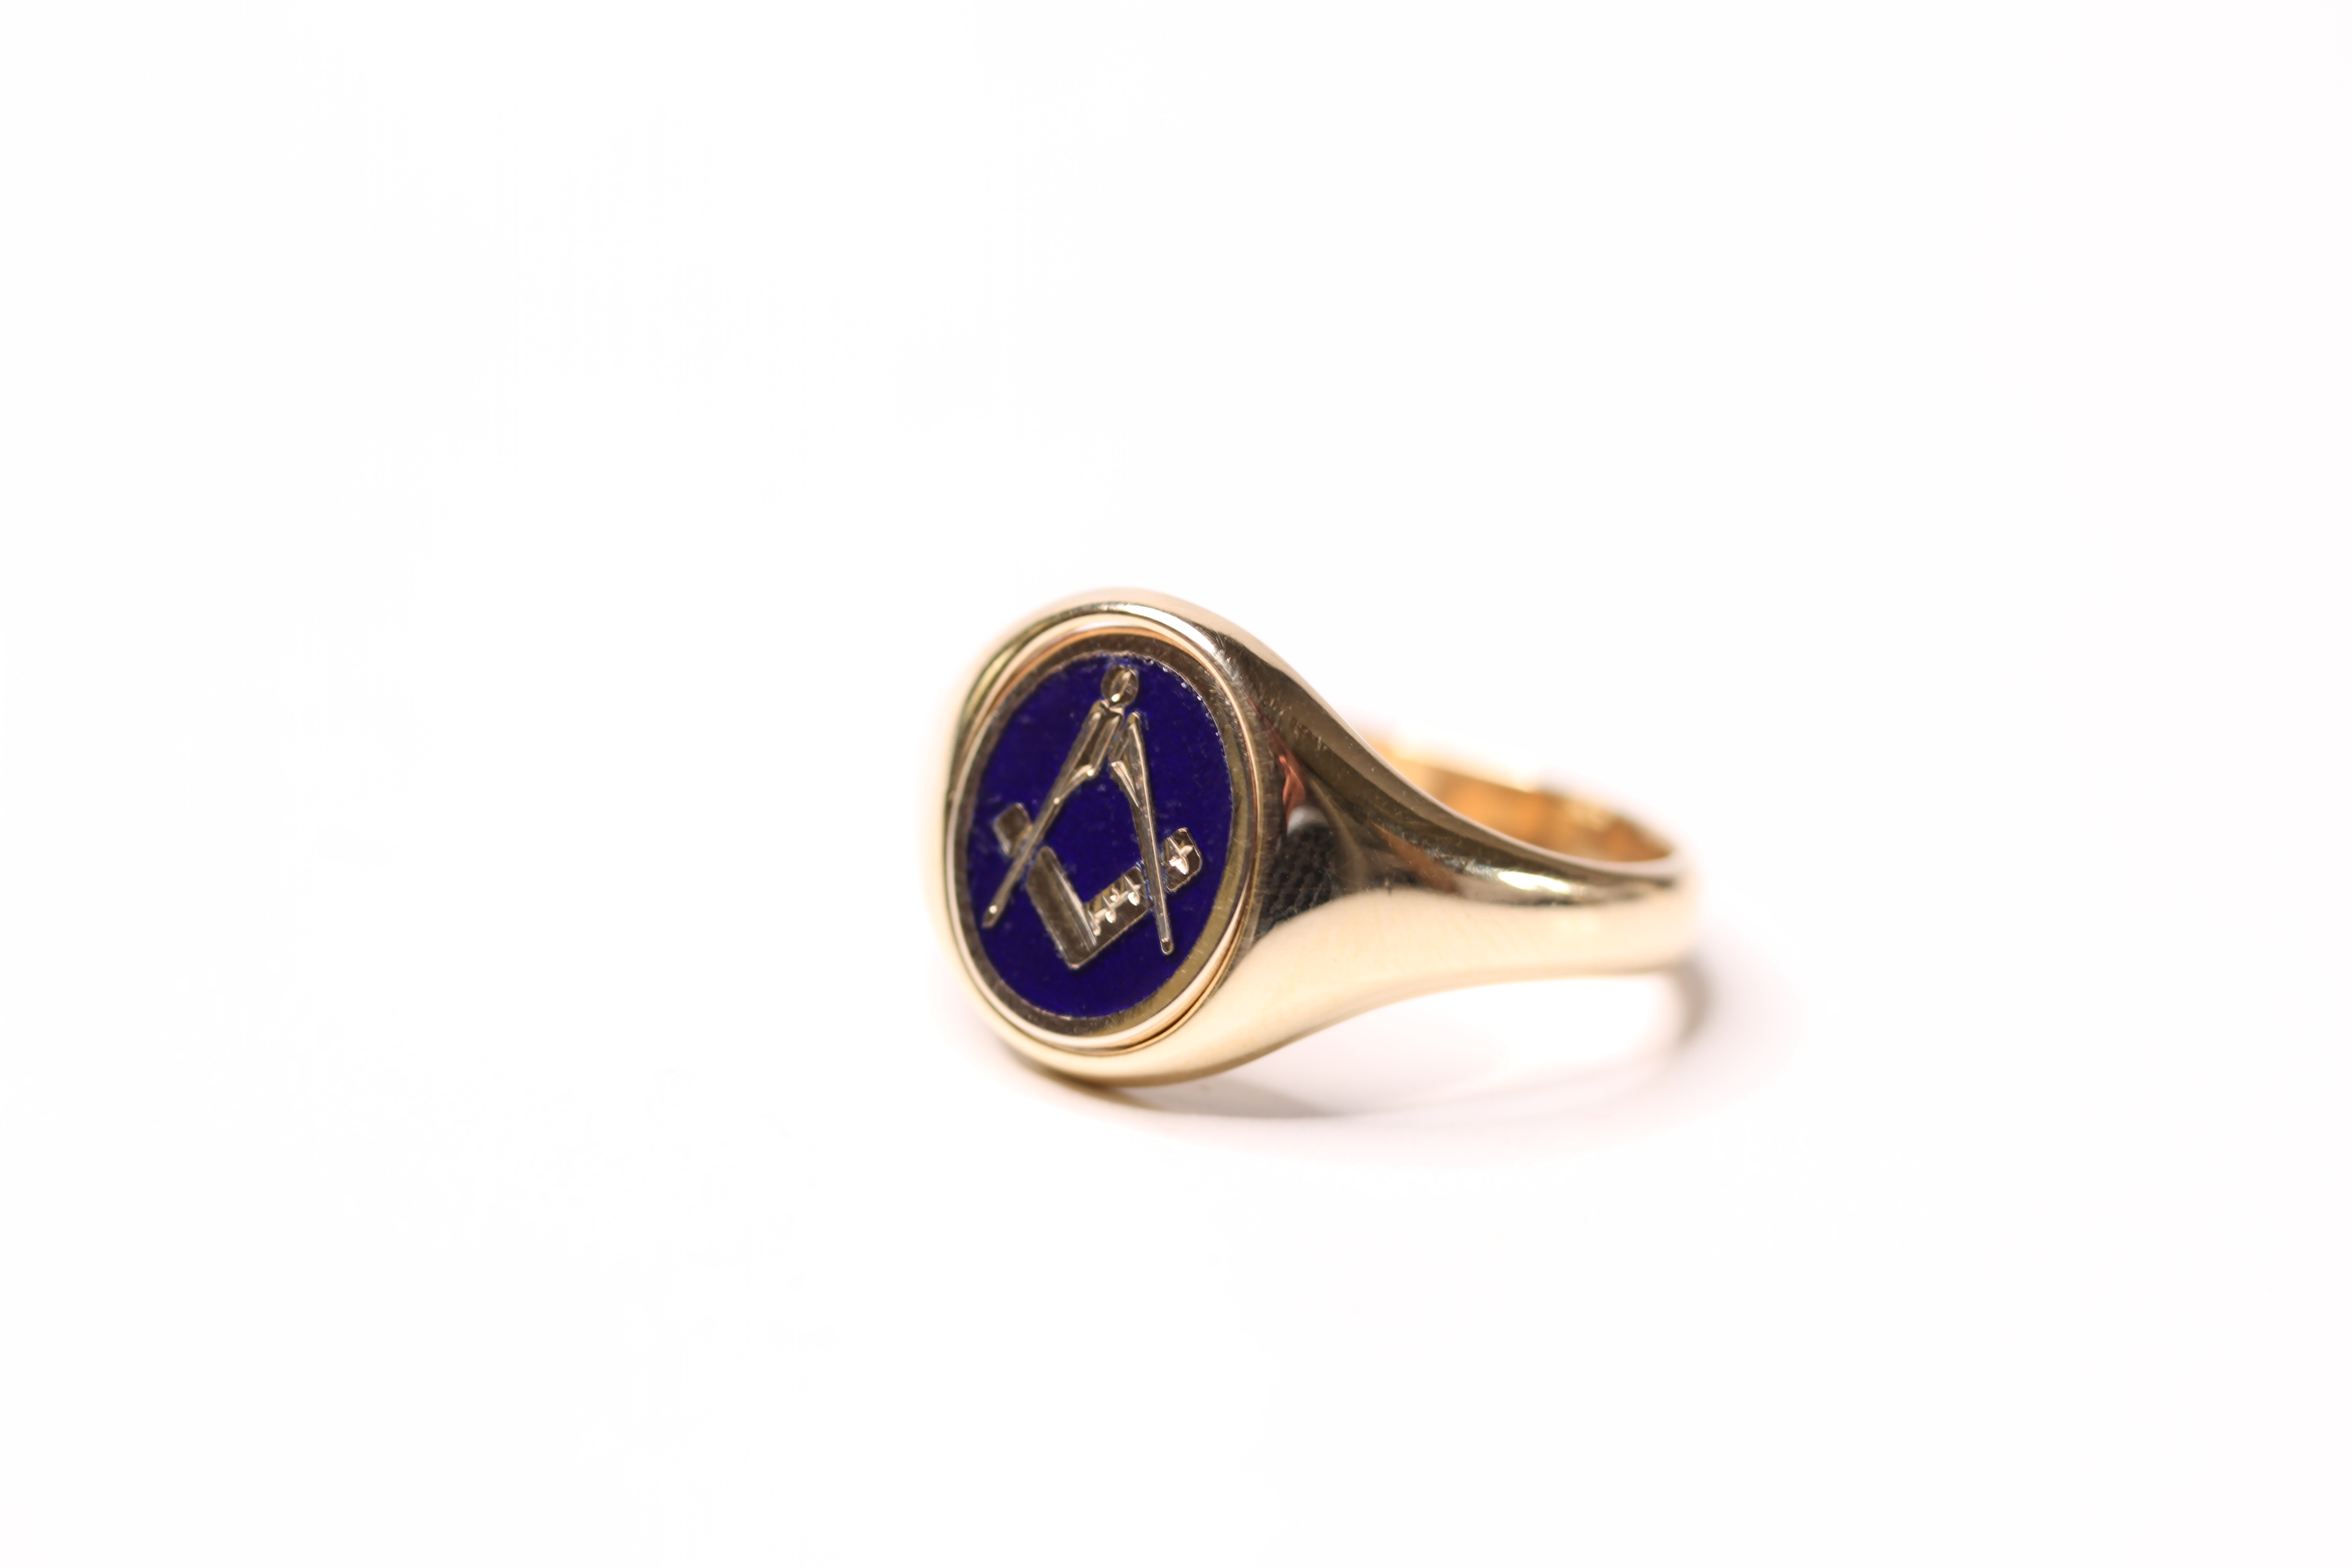 *TO BE SOLD WITHOUT RESERVE*Gentleman's 9ct Yellow Gold Masonic Ring